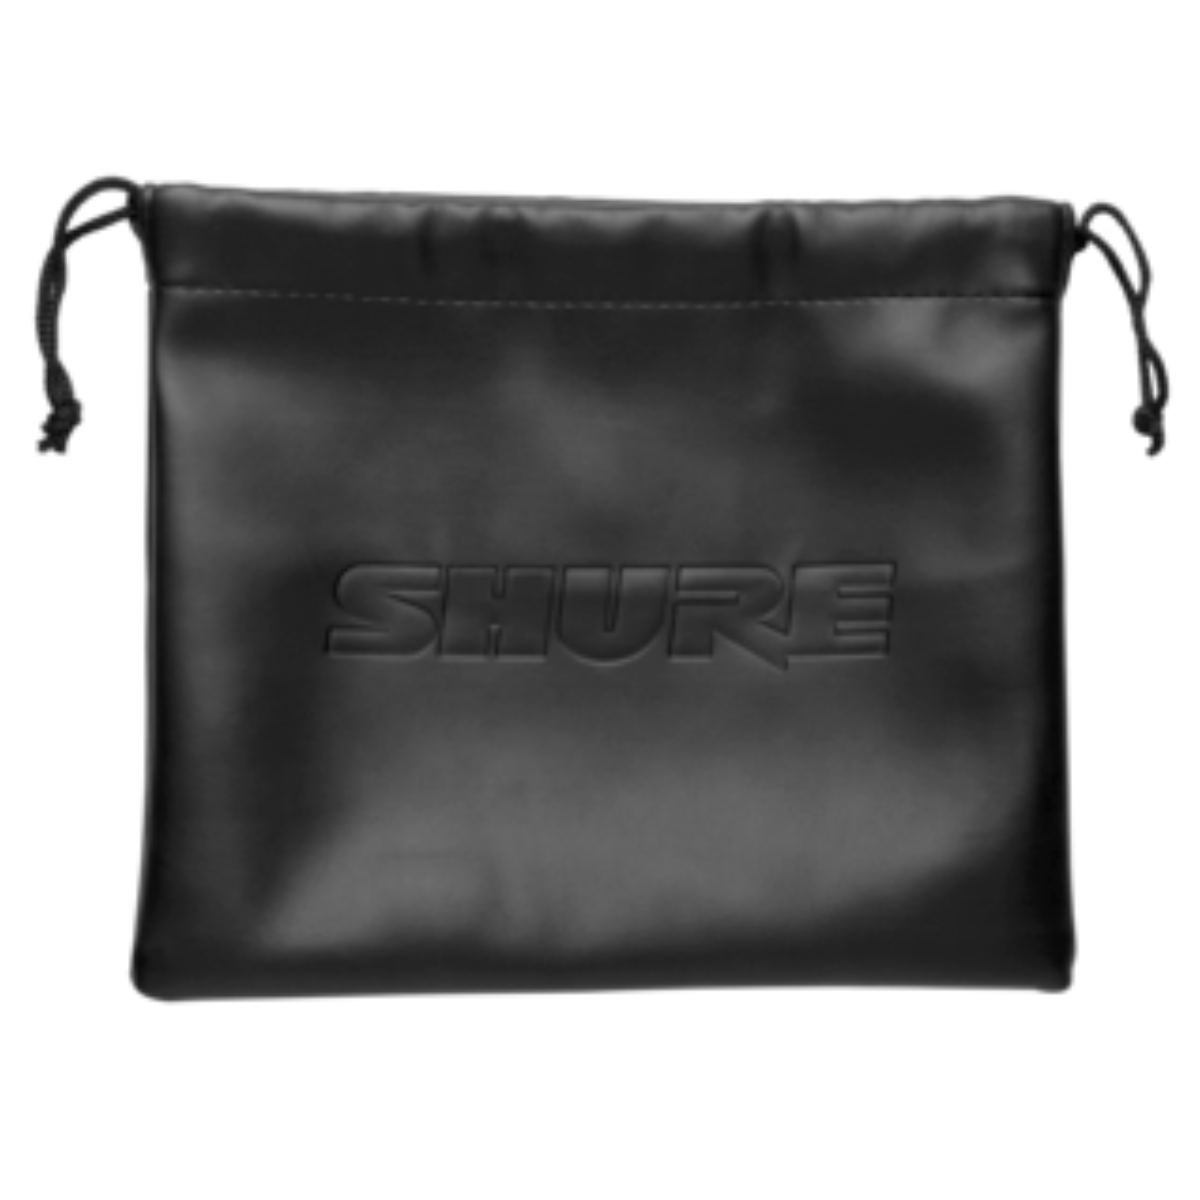 Shure Headphone Carrying Pouch